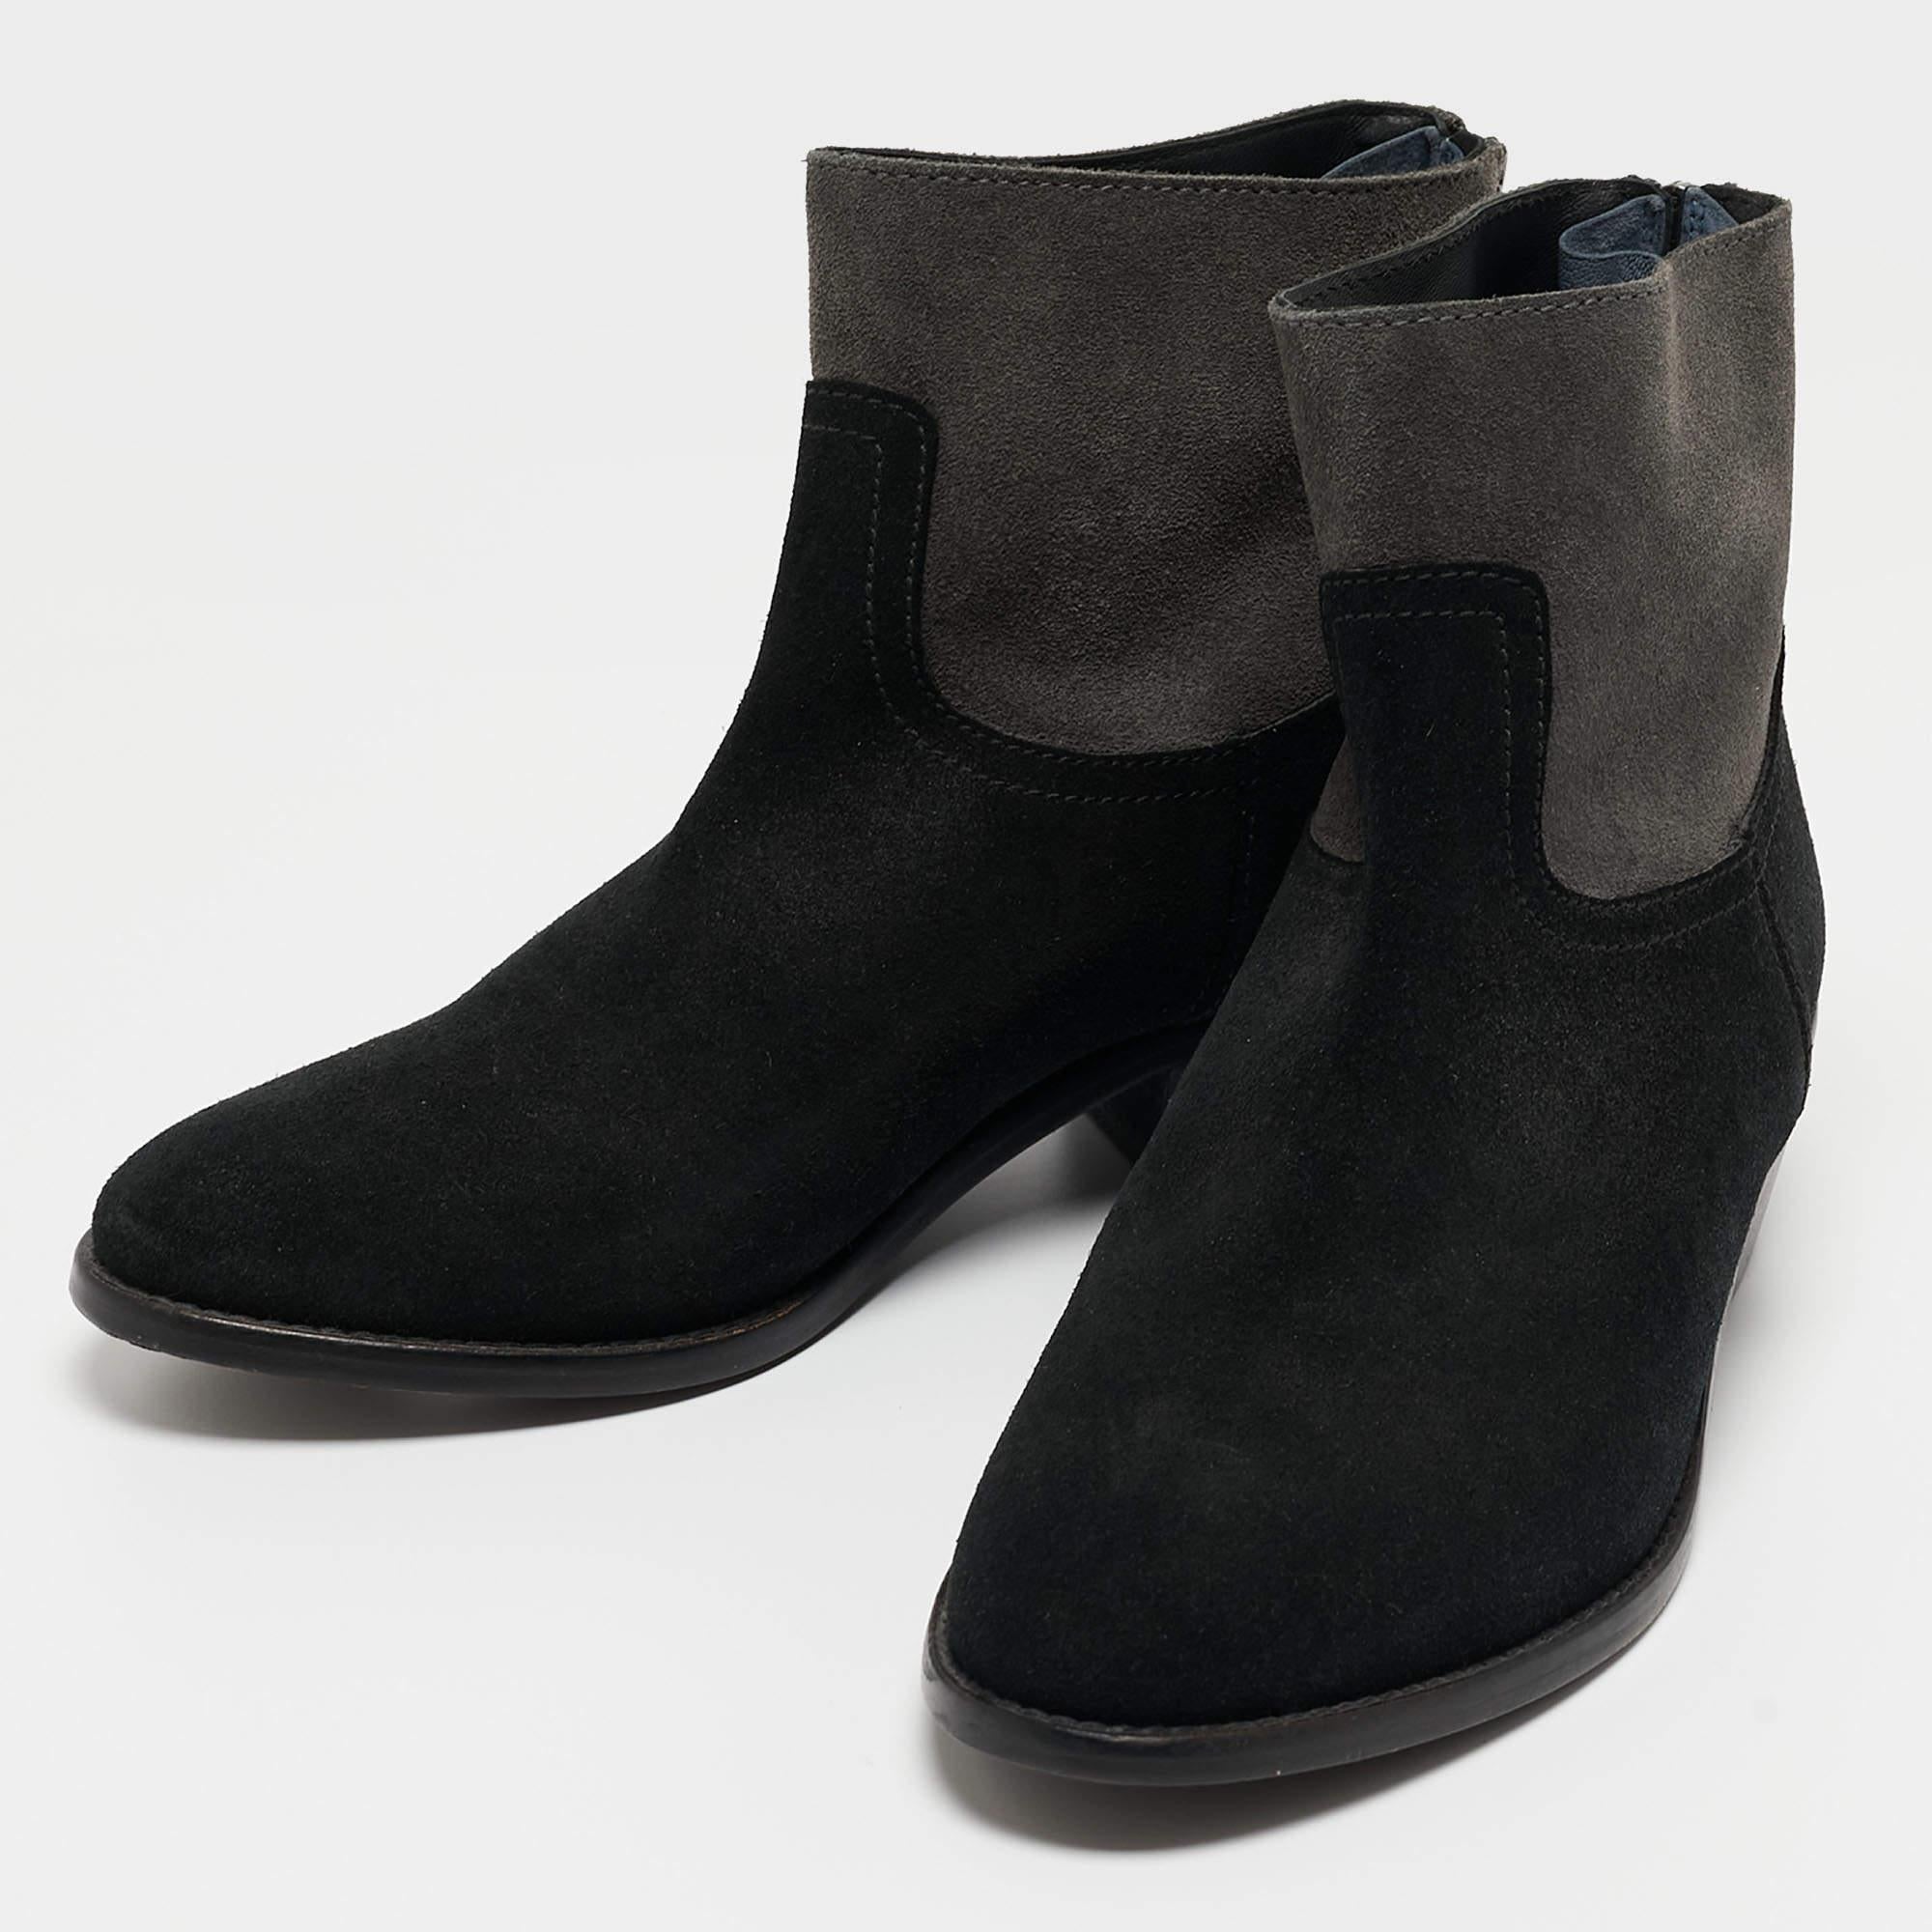 Zadig & Voltaire Black/Grey Suede Teddy Ankle Boots Size 37 For Sale 5